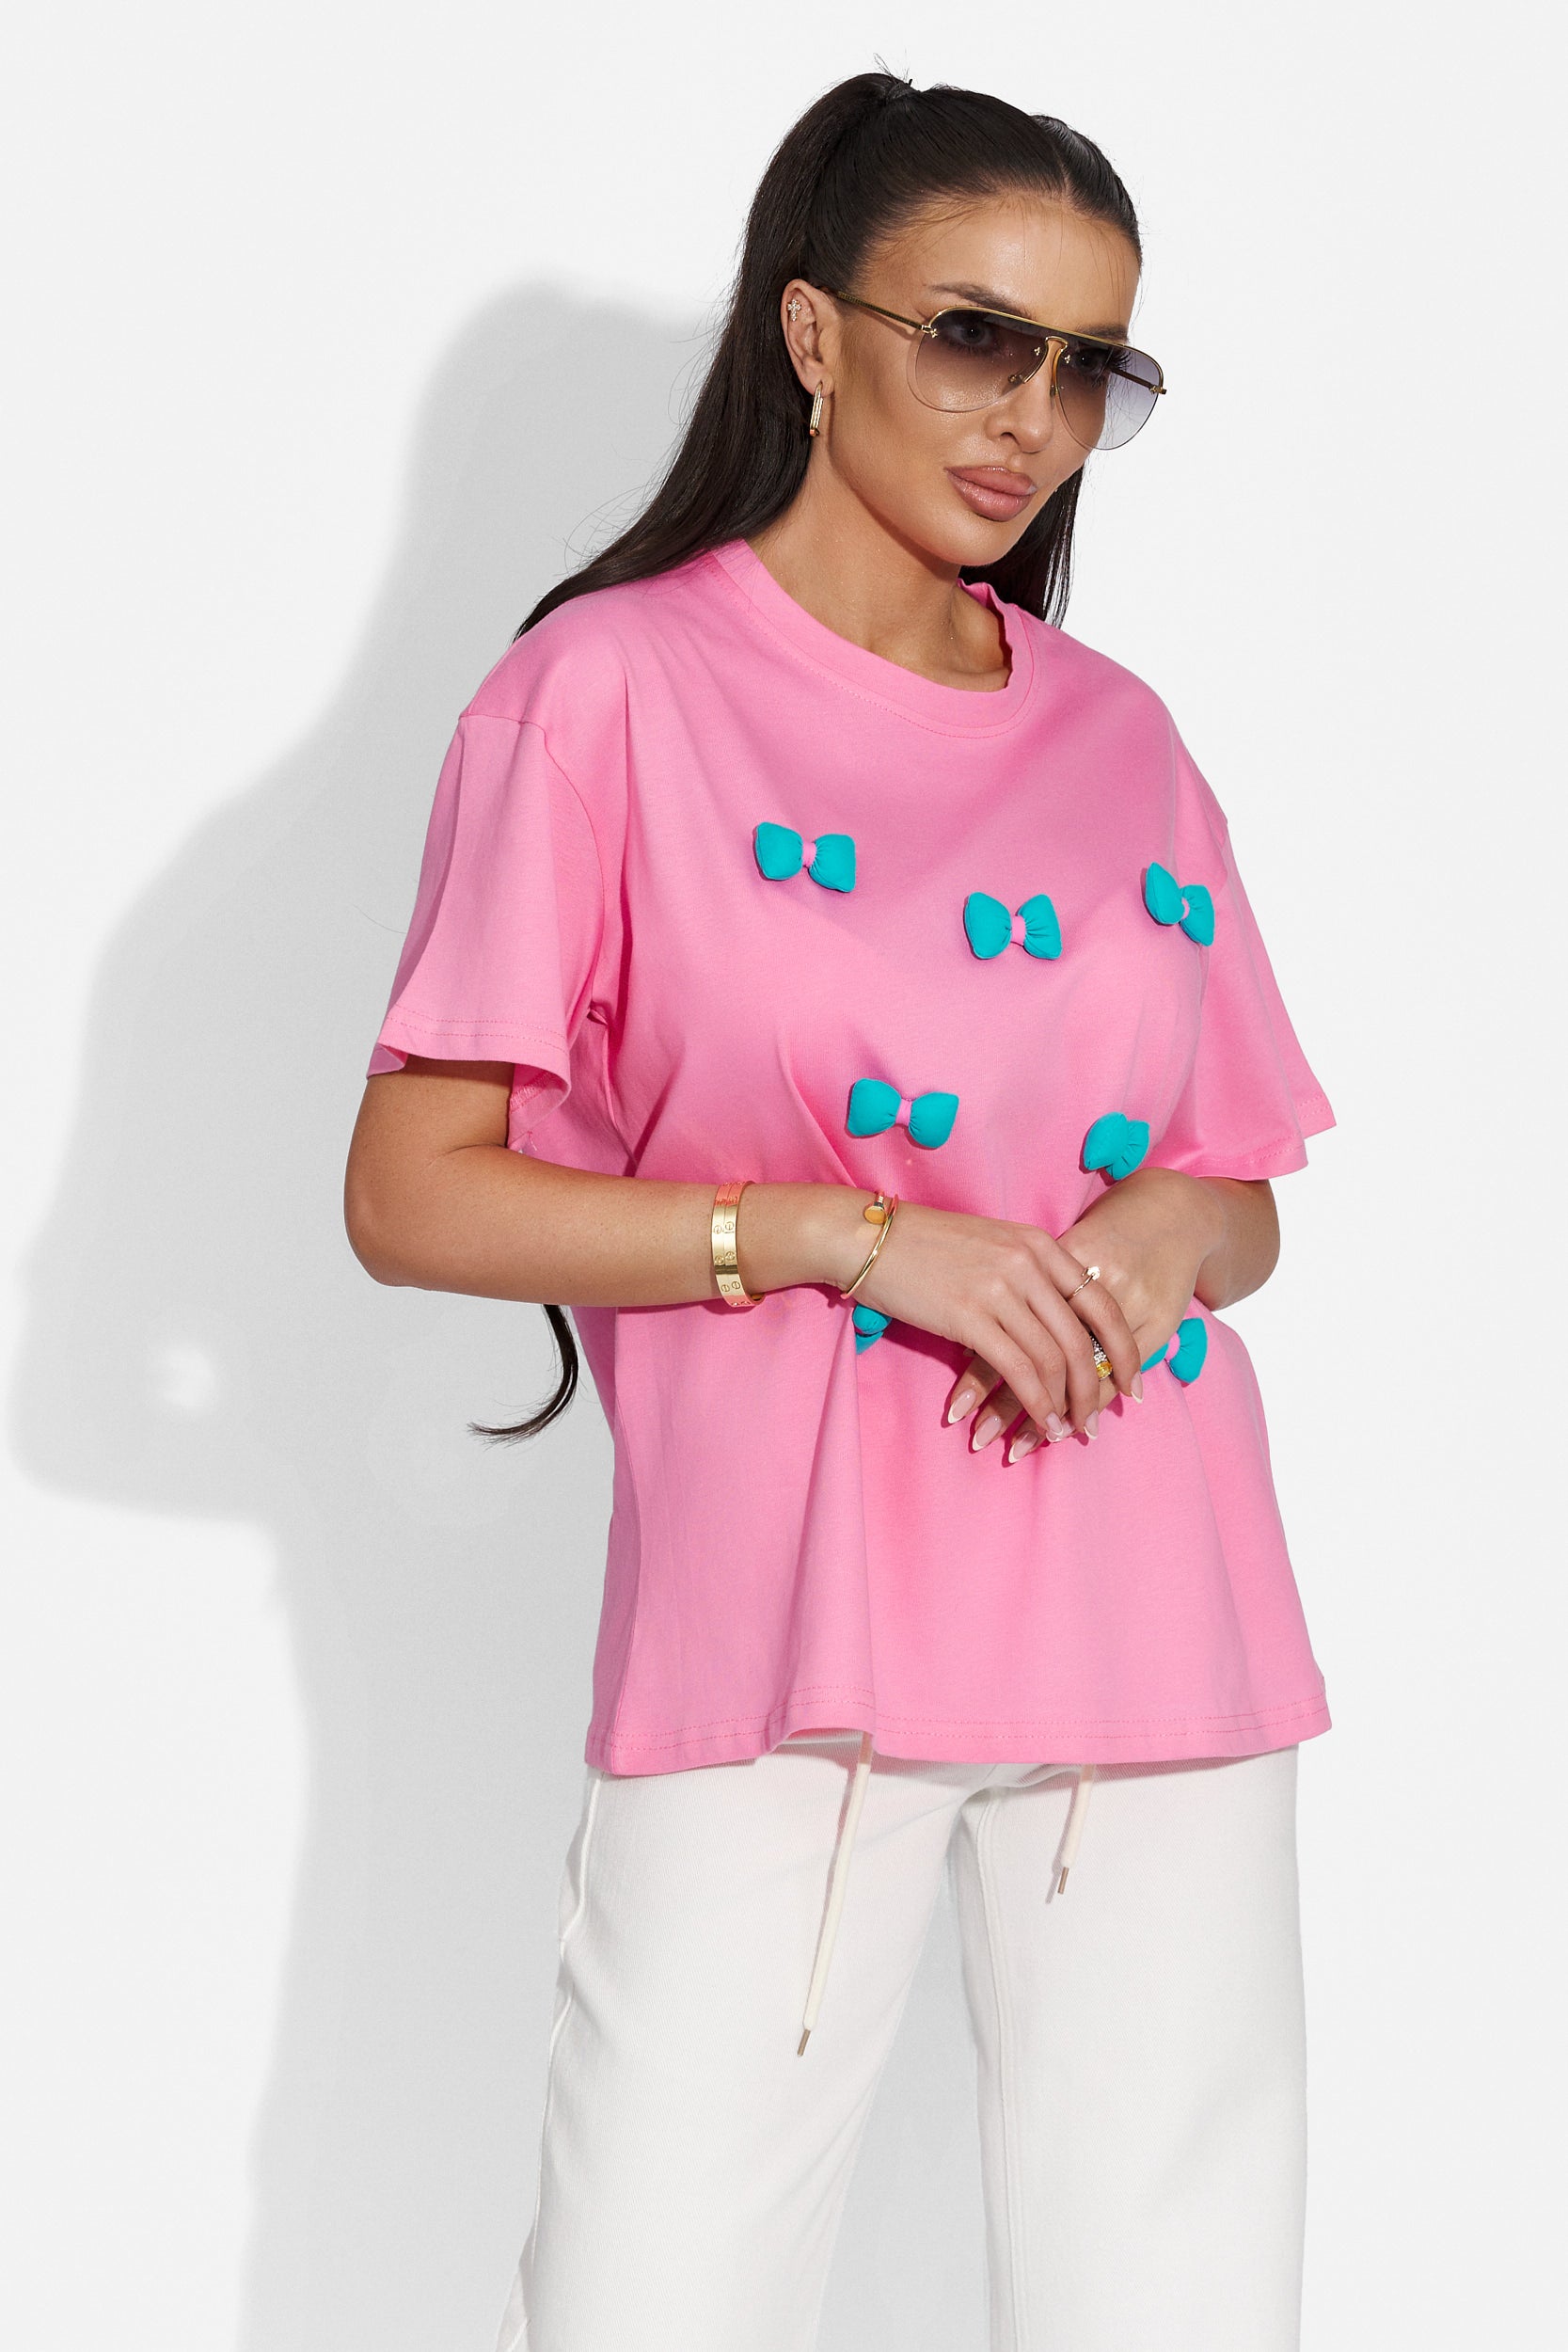 Noutany Bogas casual pink ladies t-shirt